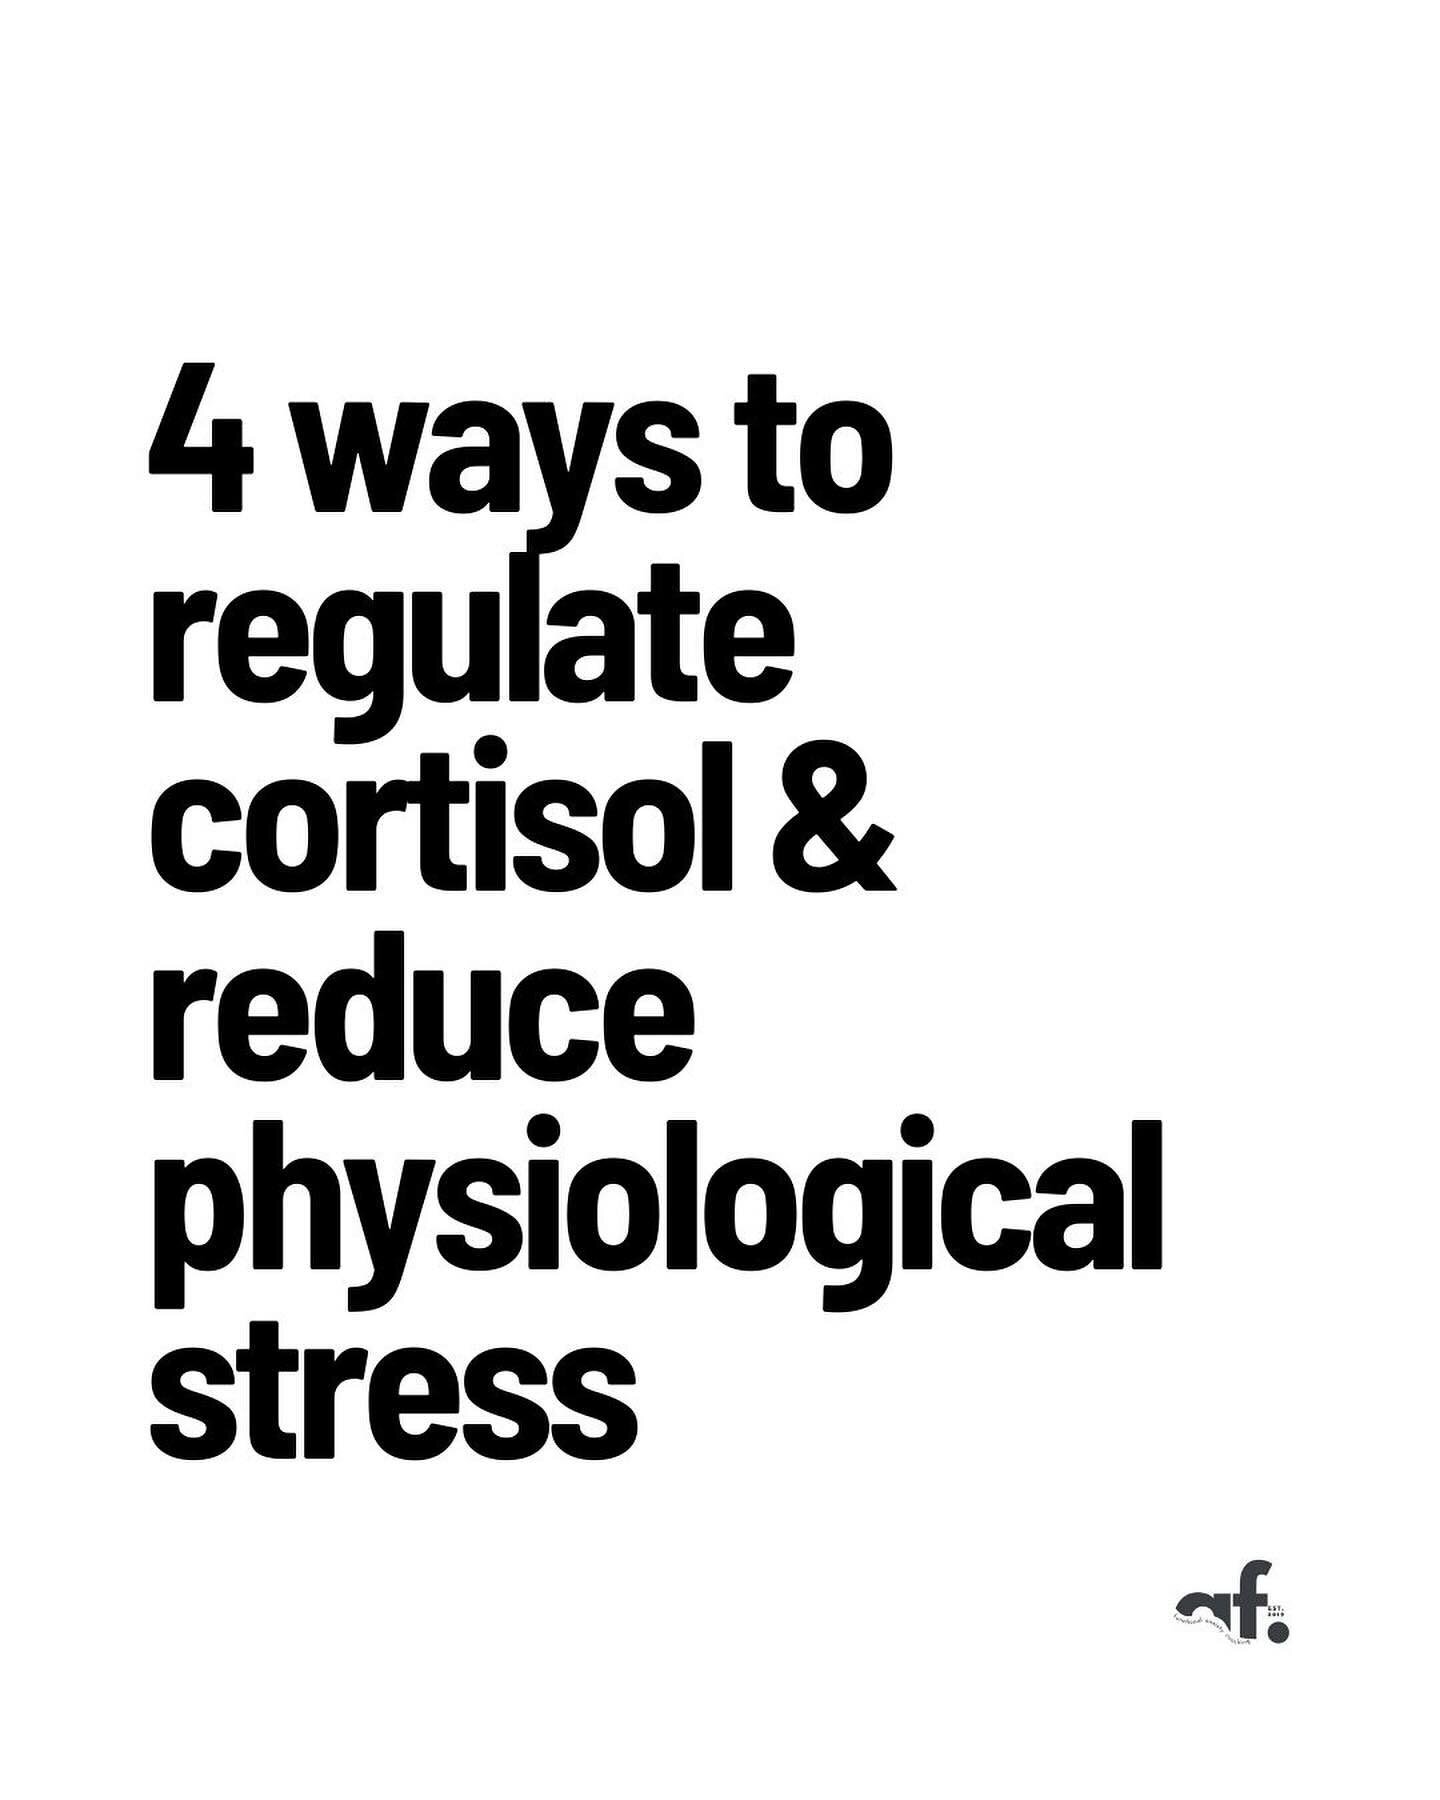 Are you feeling stressed out?⁠
⁠
Did you know that cortisol, a hormone produced in response to stress, can have negative effects on your body if not properly regulated?⁠
⁠
The good news is that you can take control of your stress levels and improve y